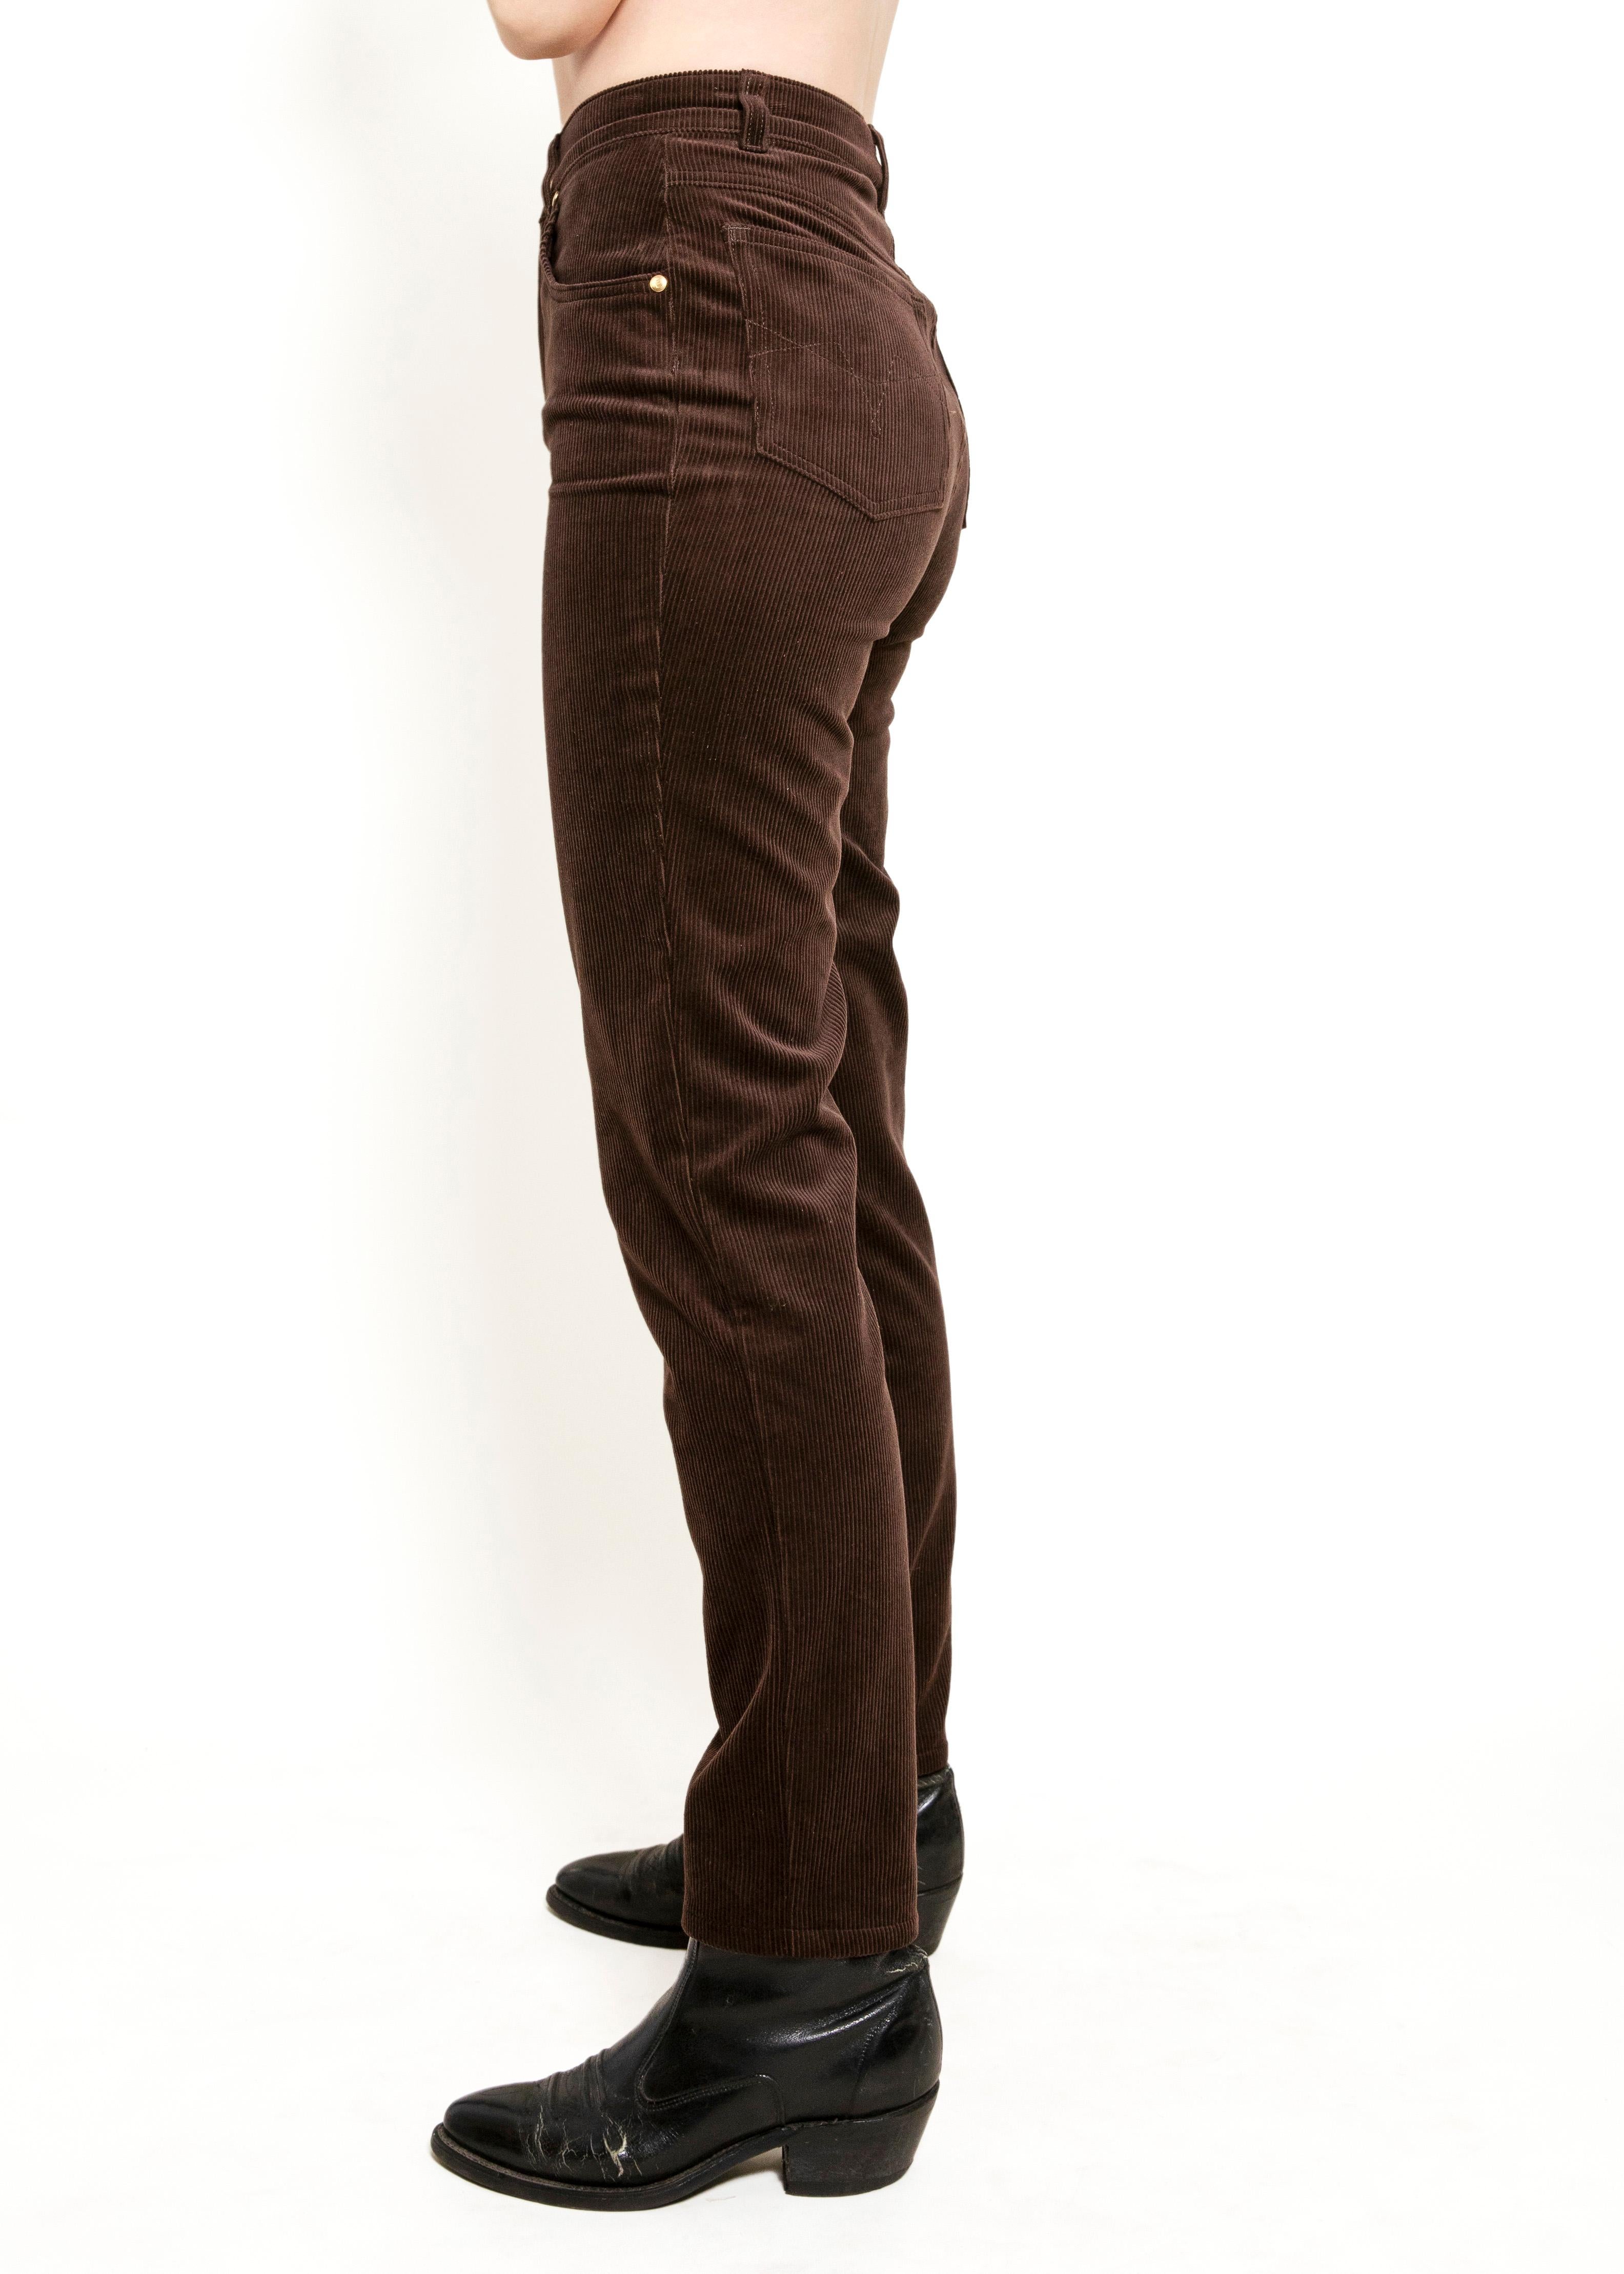 Take a risk and elevate your wardrobe with Escada Choc Brn Corduroy Pants. Featuring a high waist and flattering fit in a rich chocolate brown color, these pants are both daring and stylish. Perfect for those who want to stand out and make a